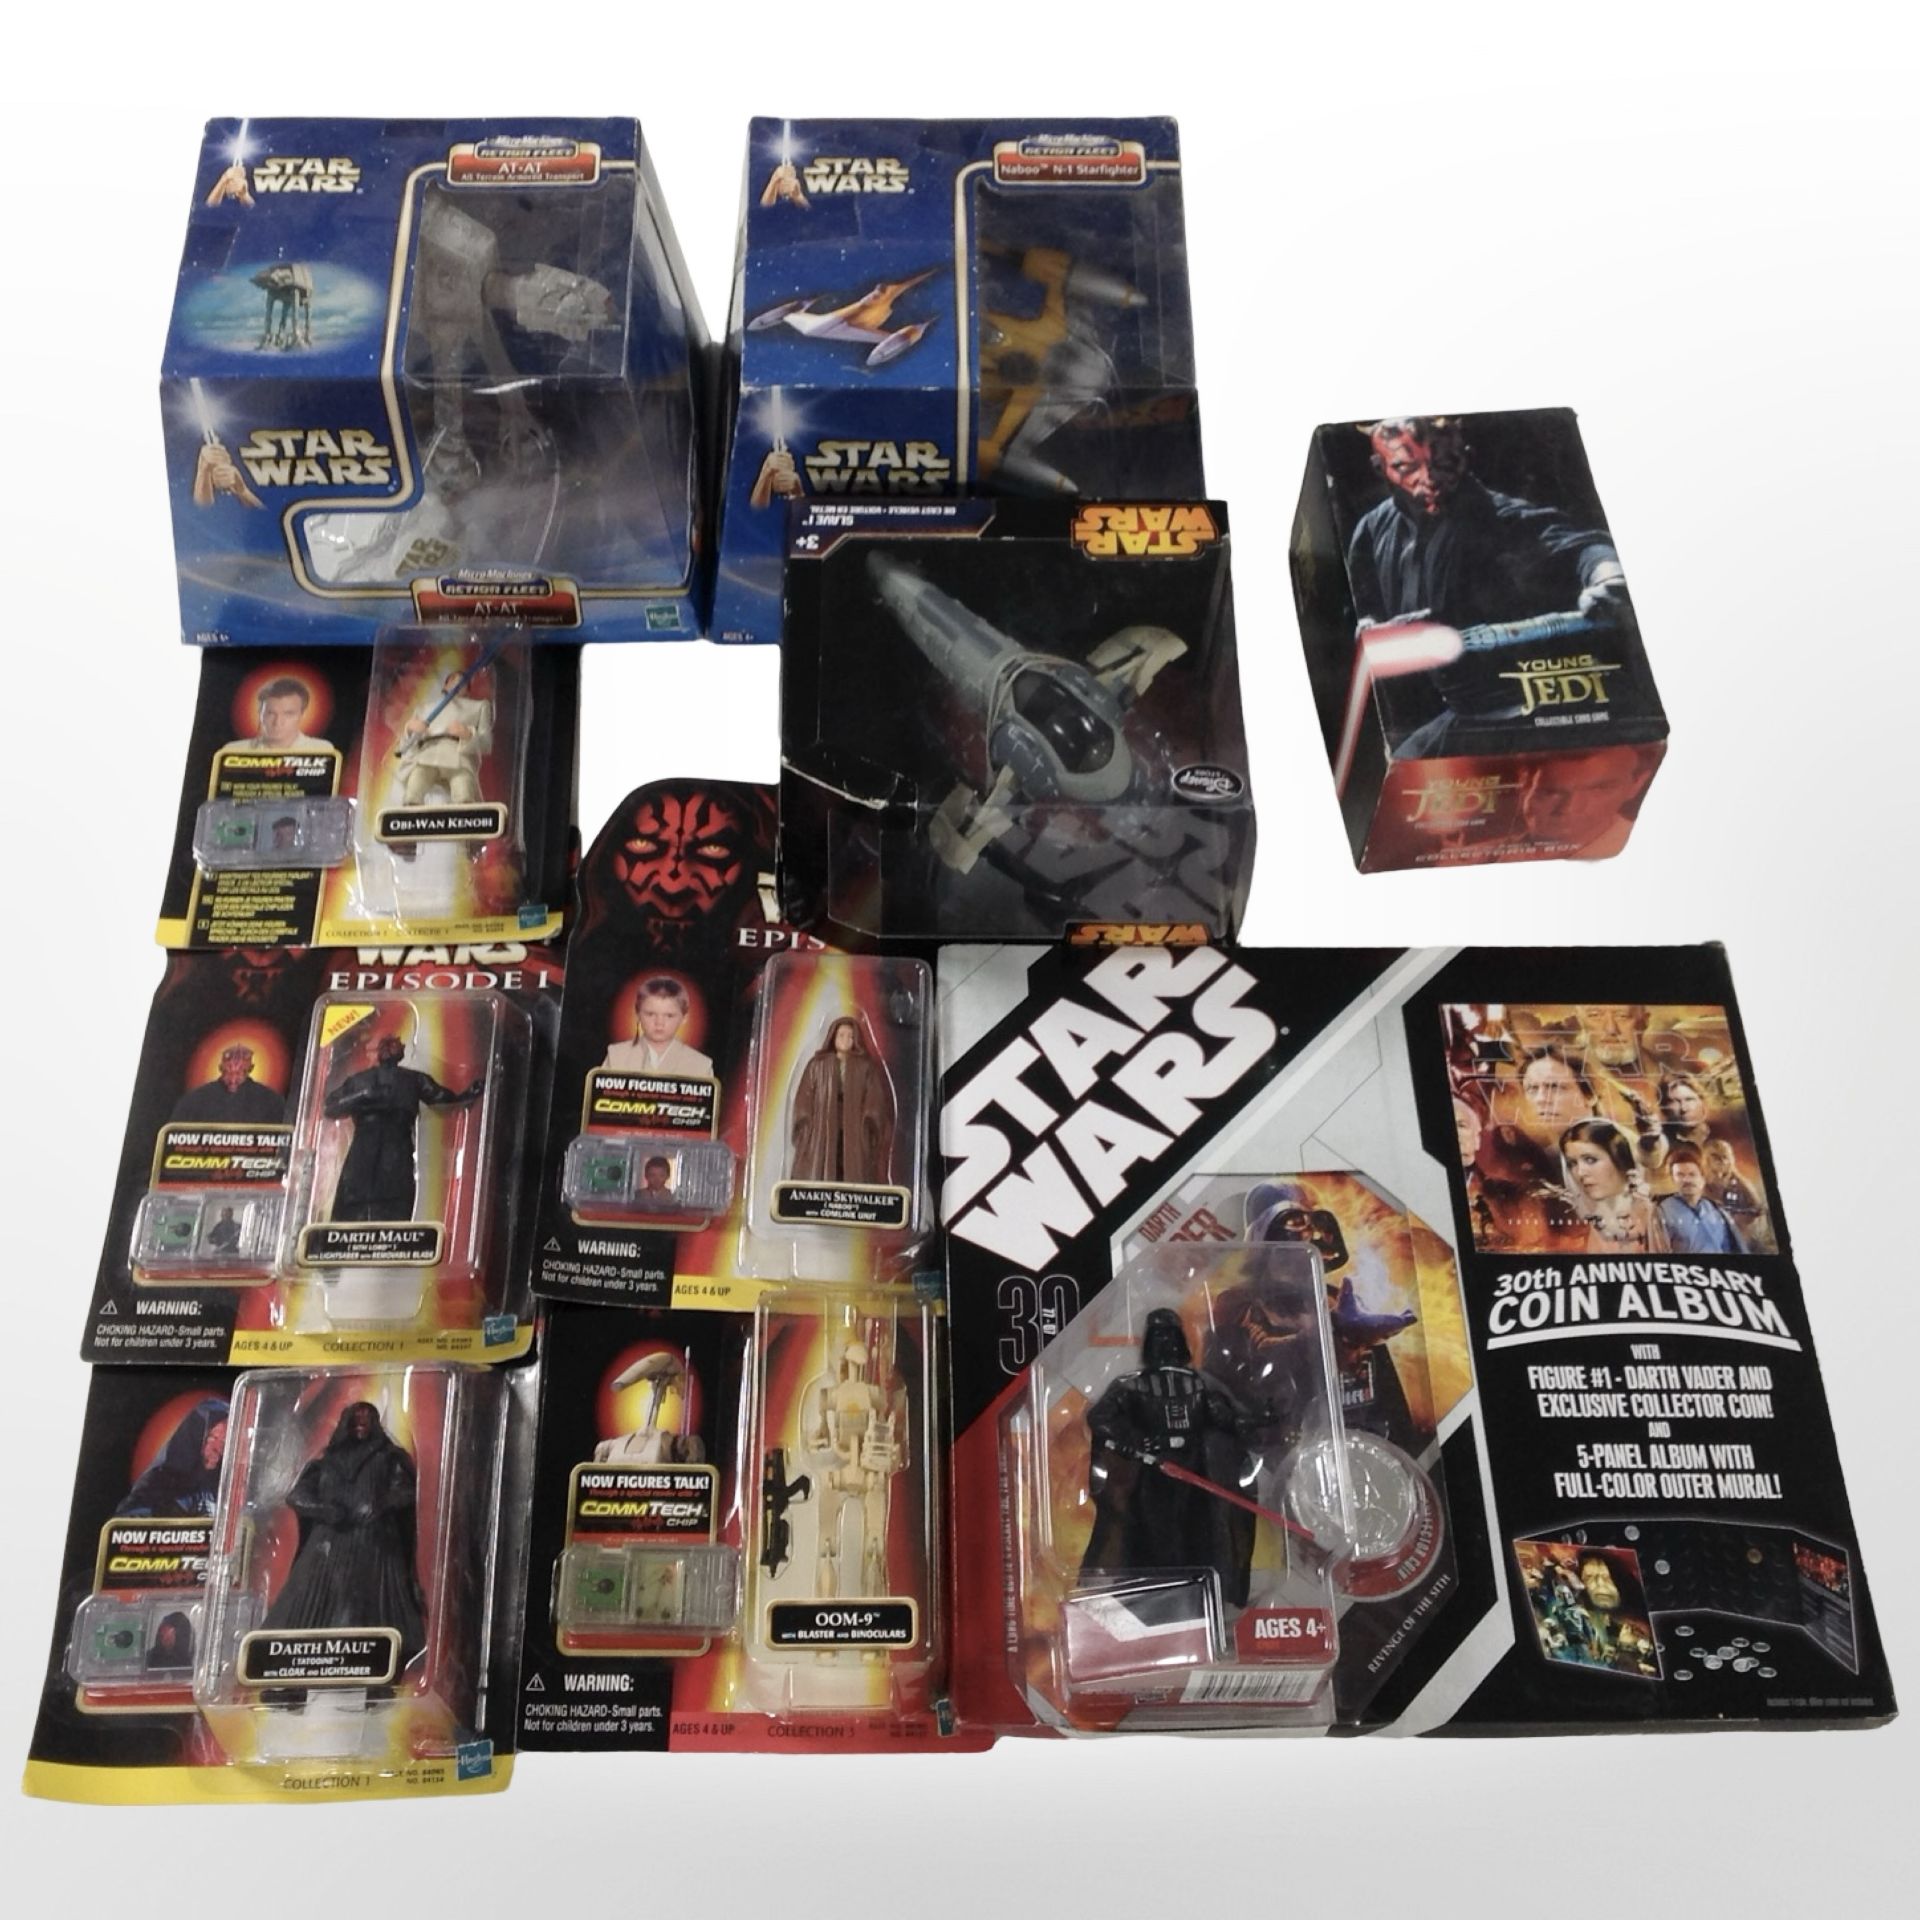 10 Hasbro and Disney Store Star Wars figurines/models, boxed.